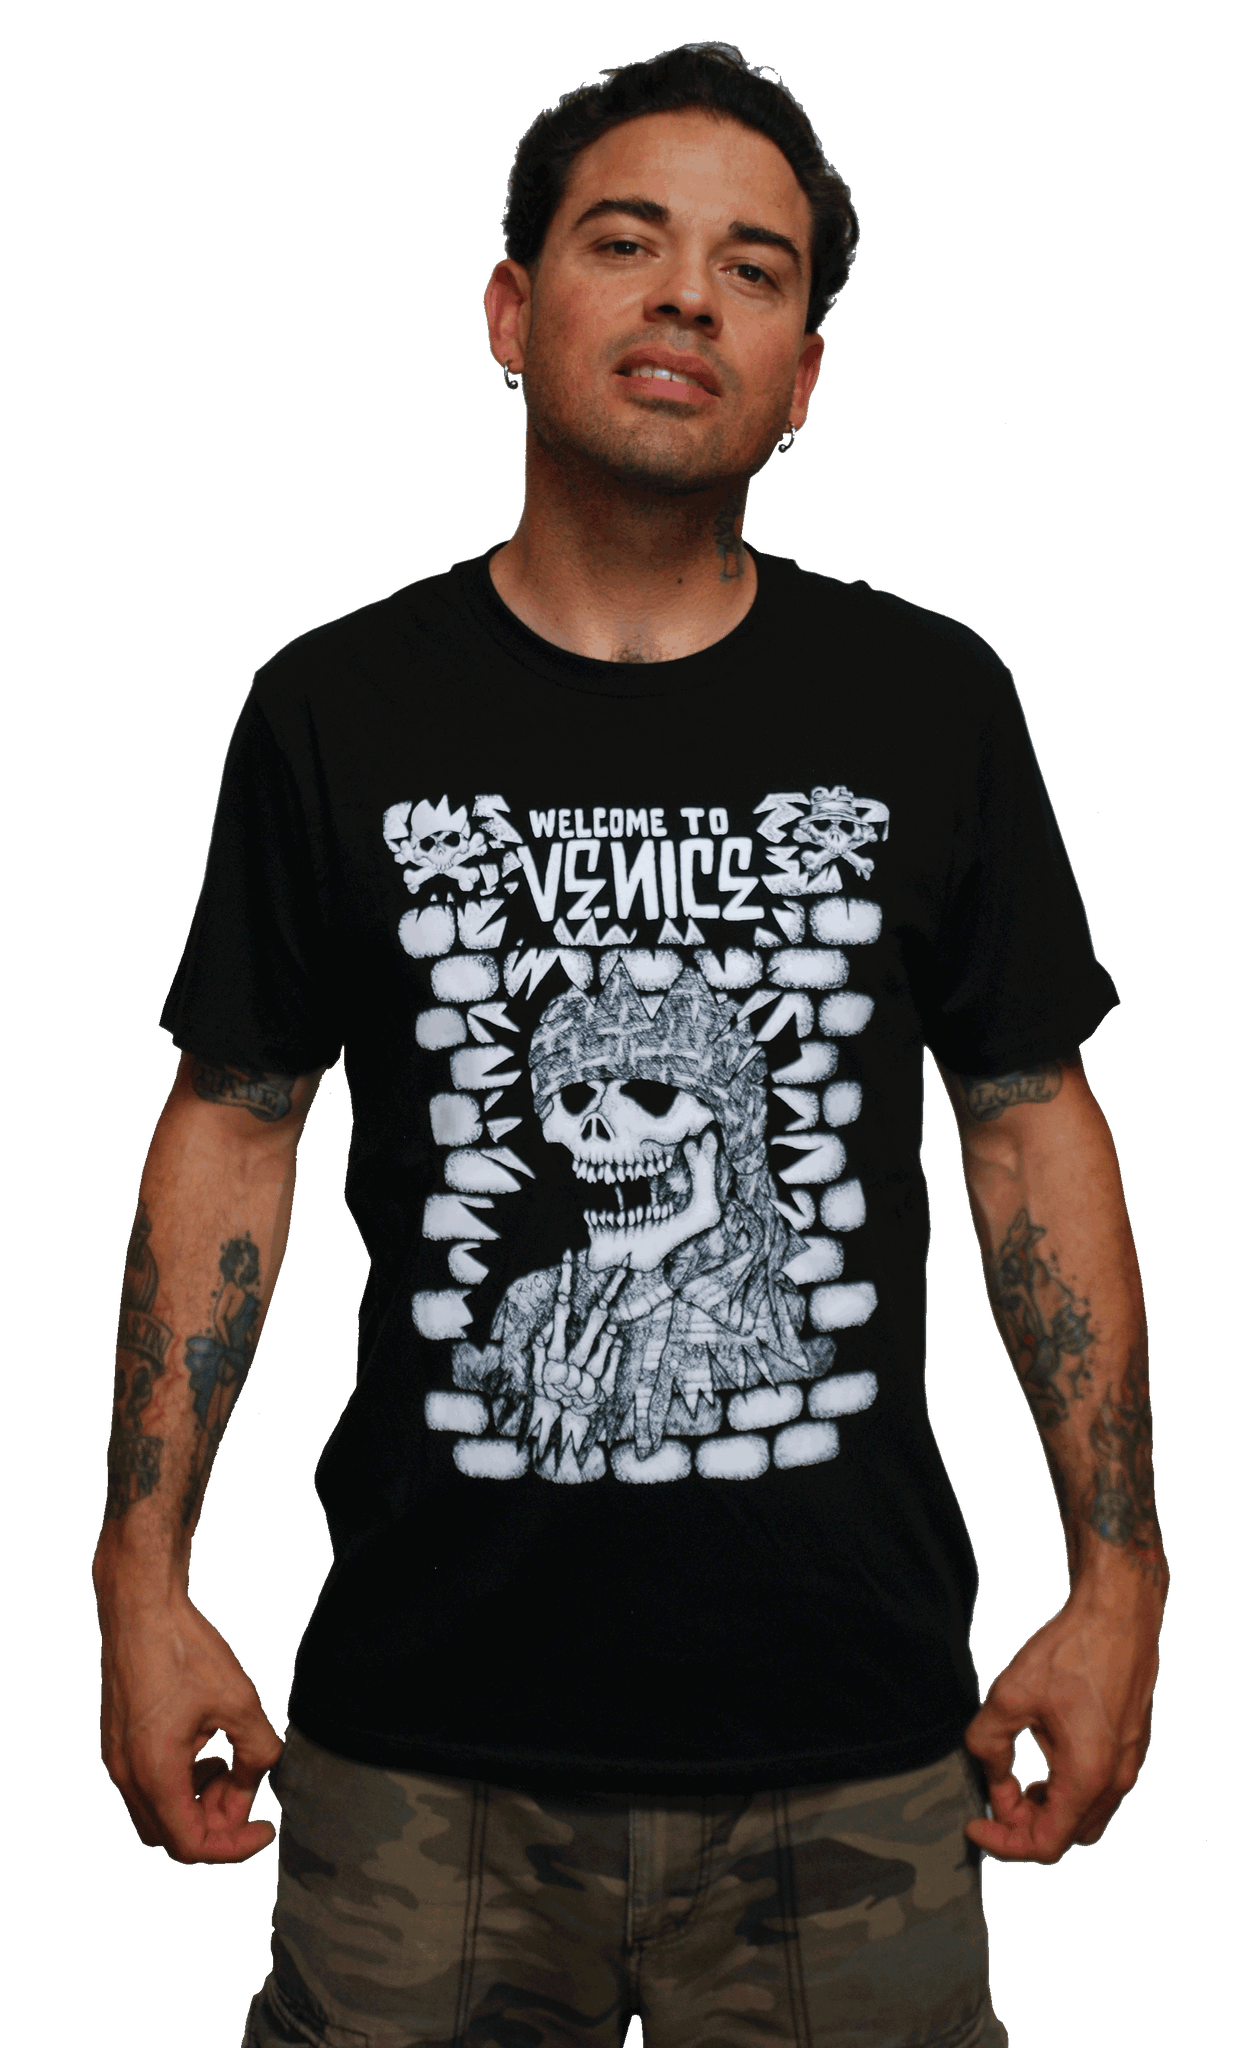 RXCX "WELCOME TO VENICE" T-SHIRT